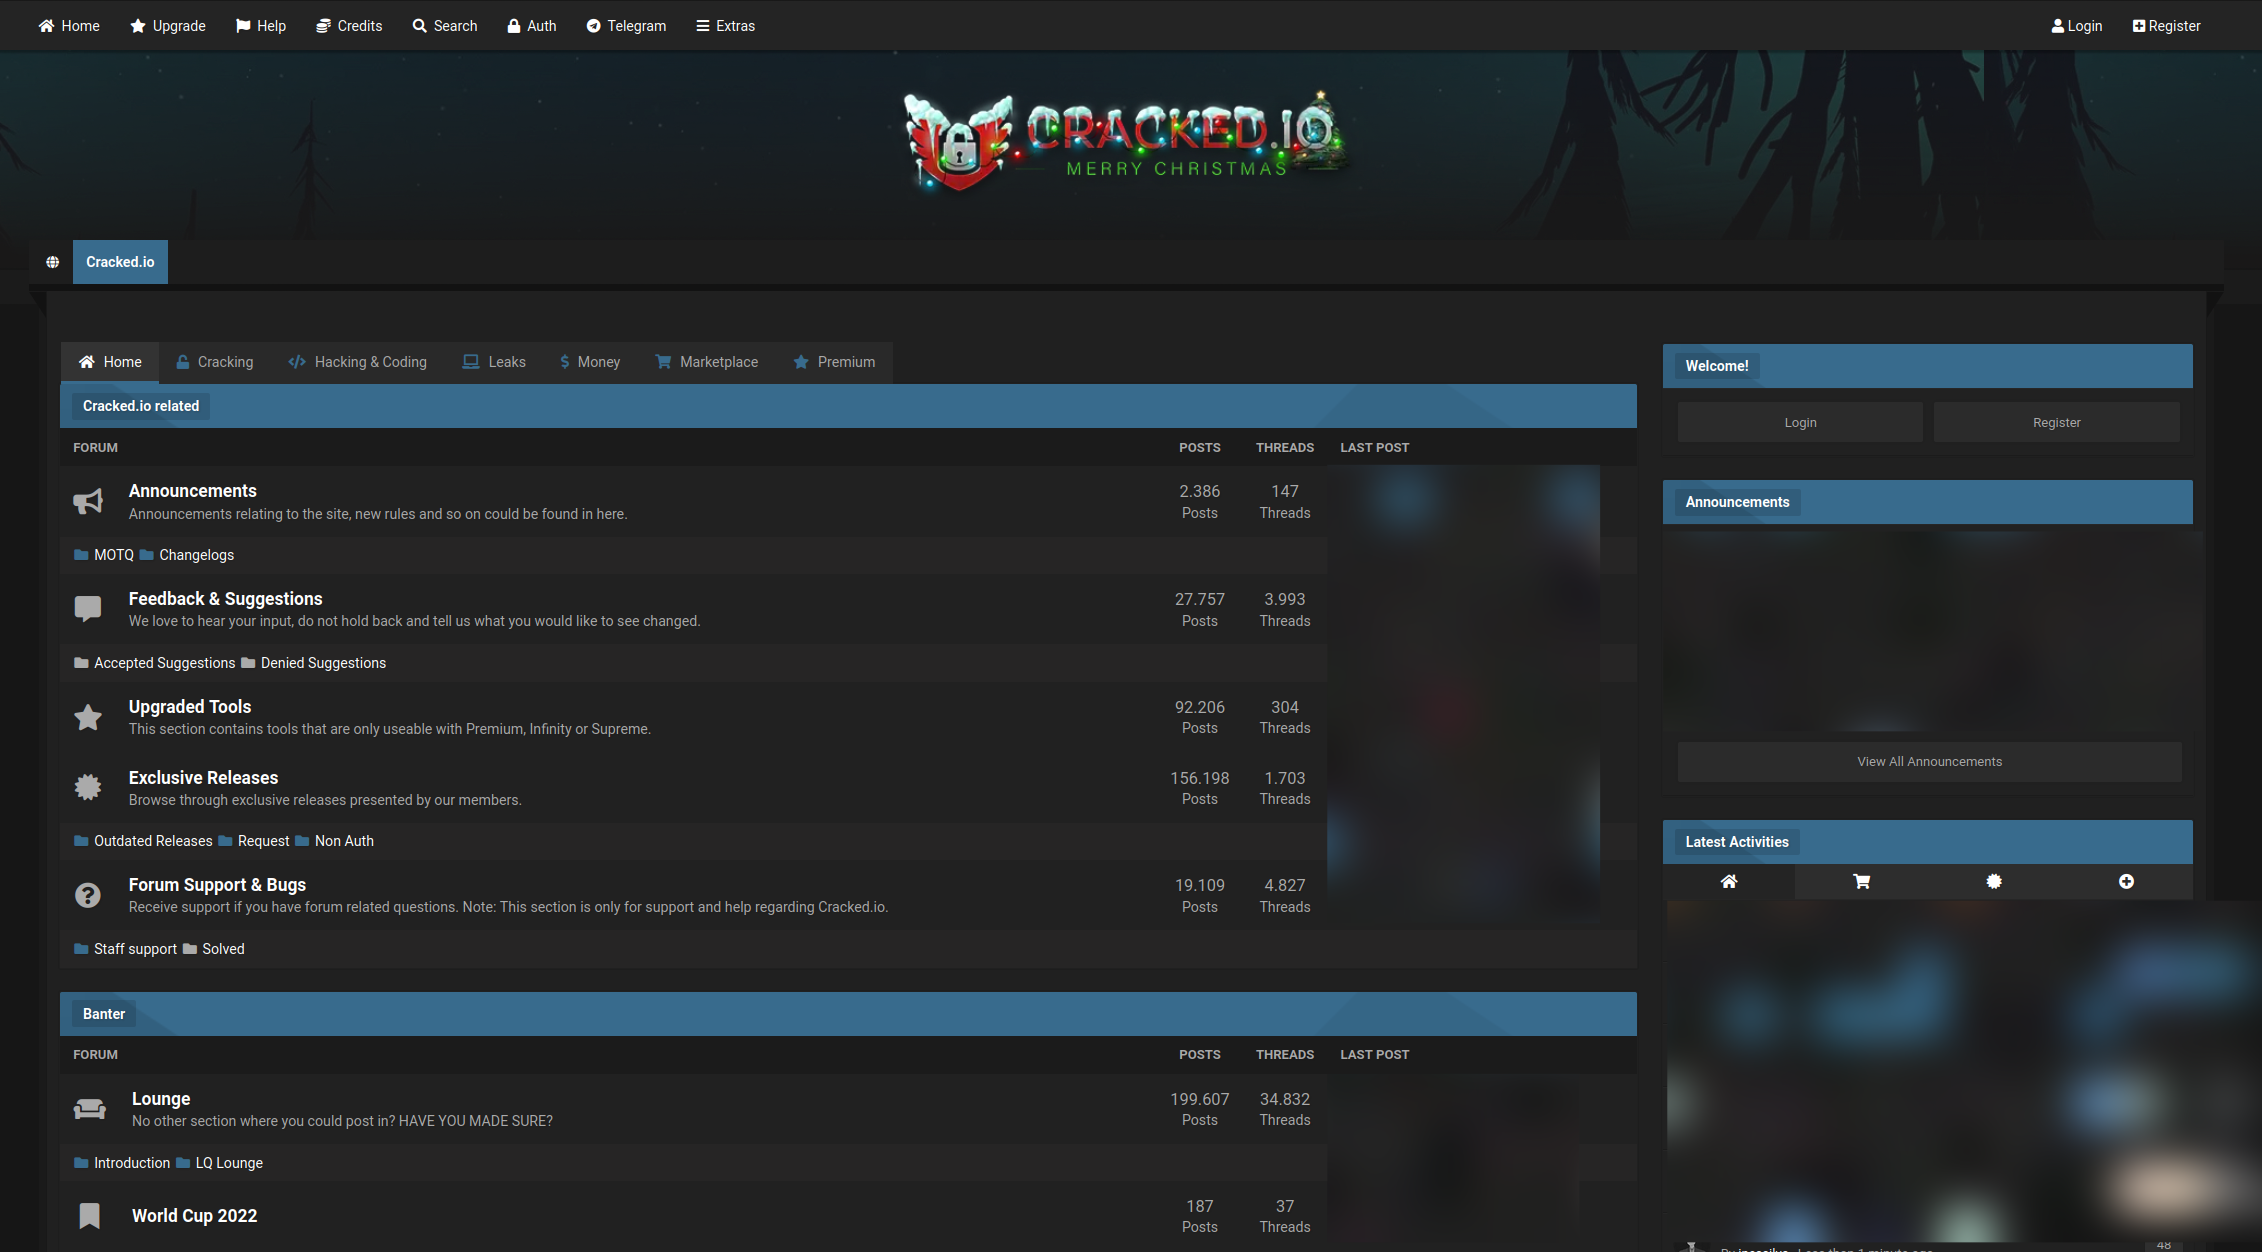 Screenshot of forum with the title “Cracked.io” in the top middle. The rest of the homepage has announcements and other sections for interactions. The background is black with blue bars for different sections. 